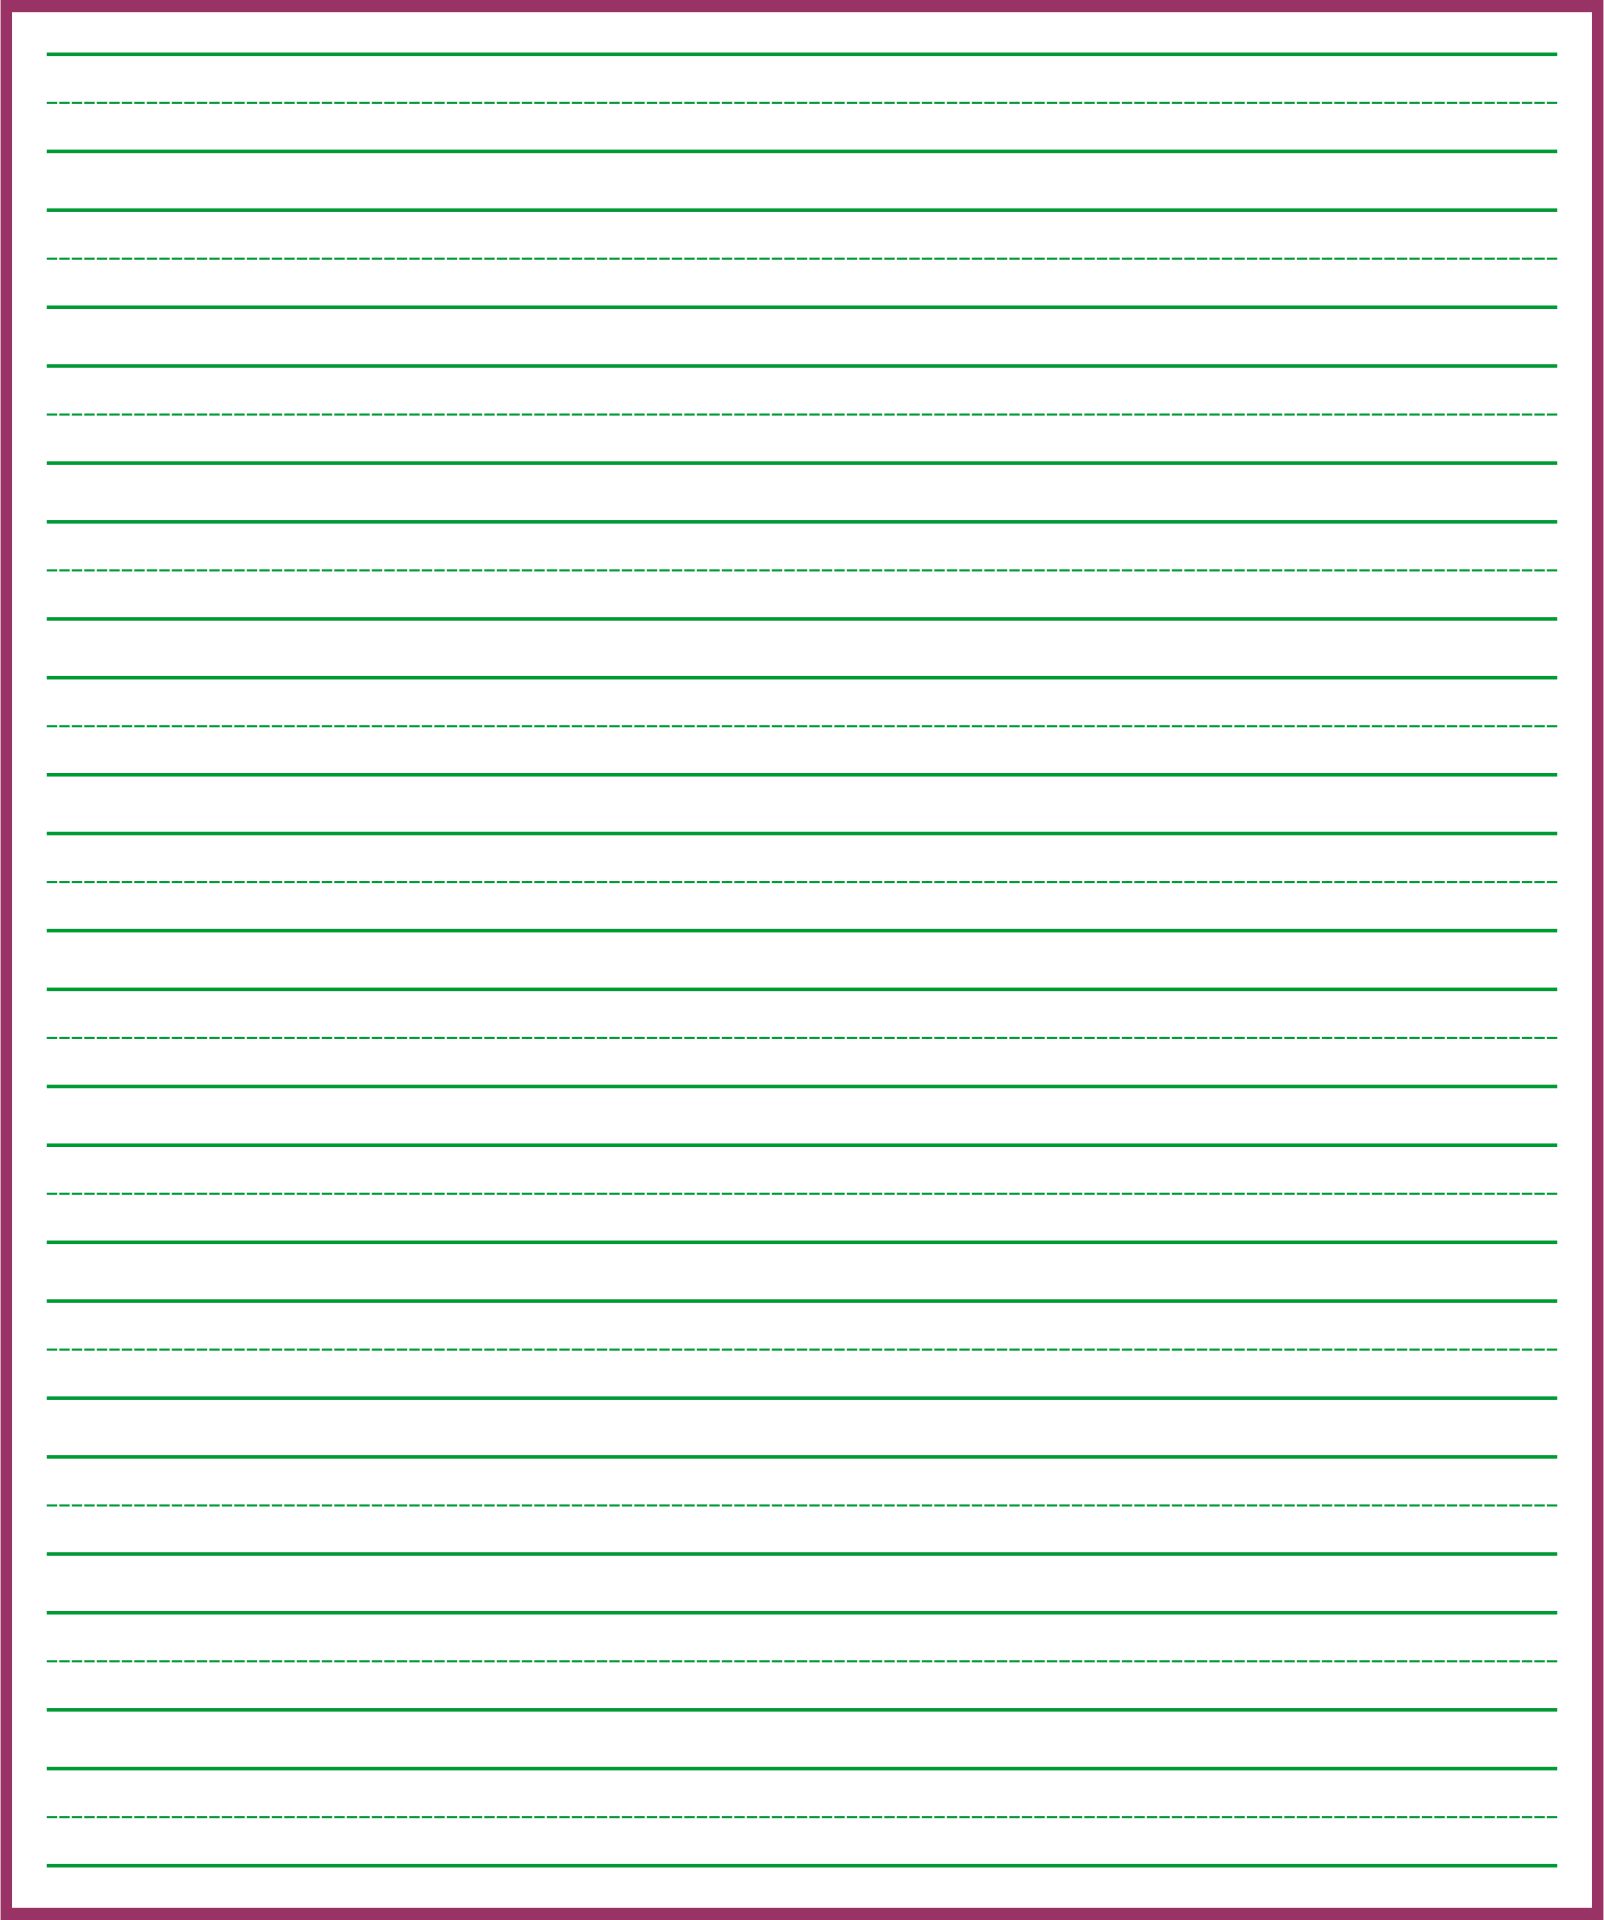 9 Best Images of Standard Printable Lined Writing Paper Lined Writing